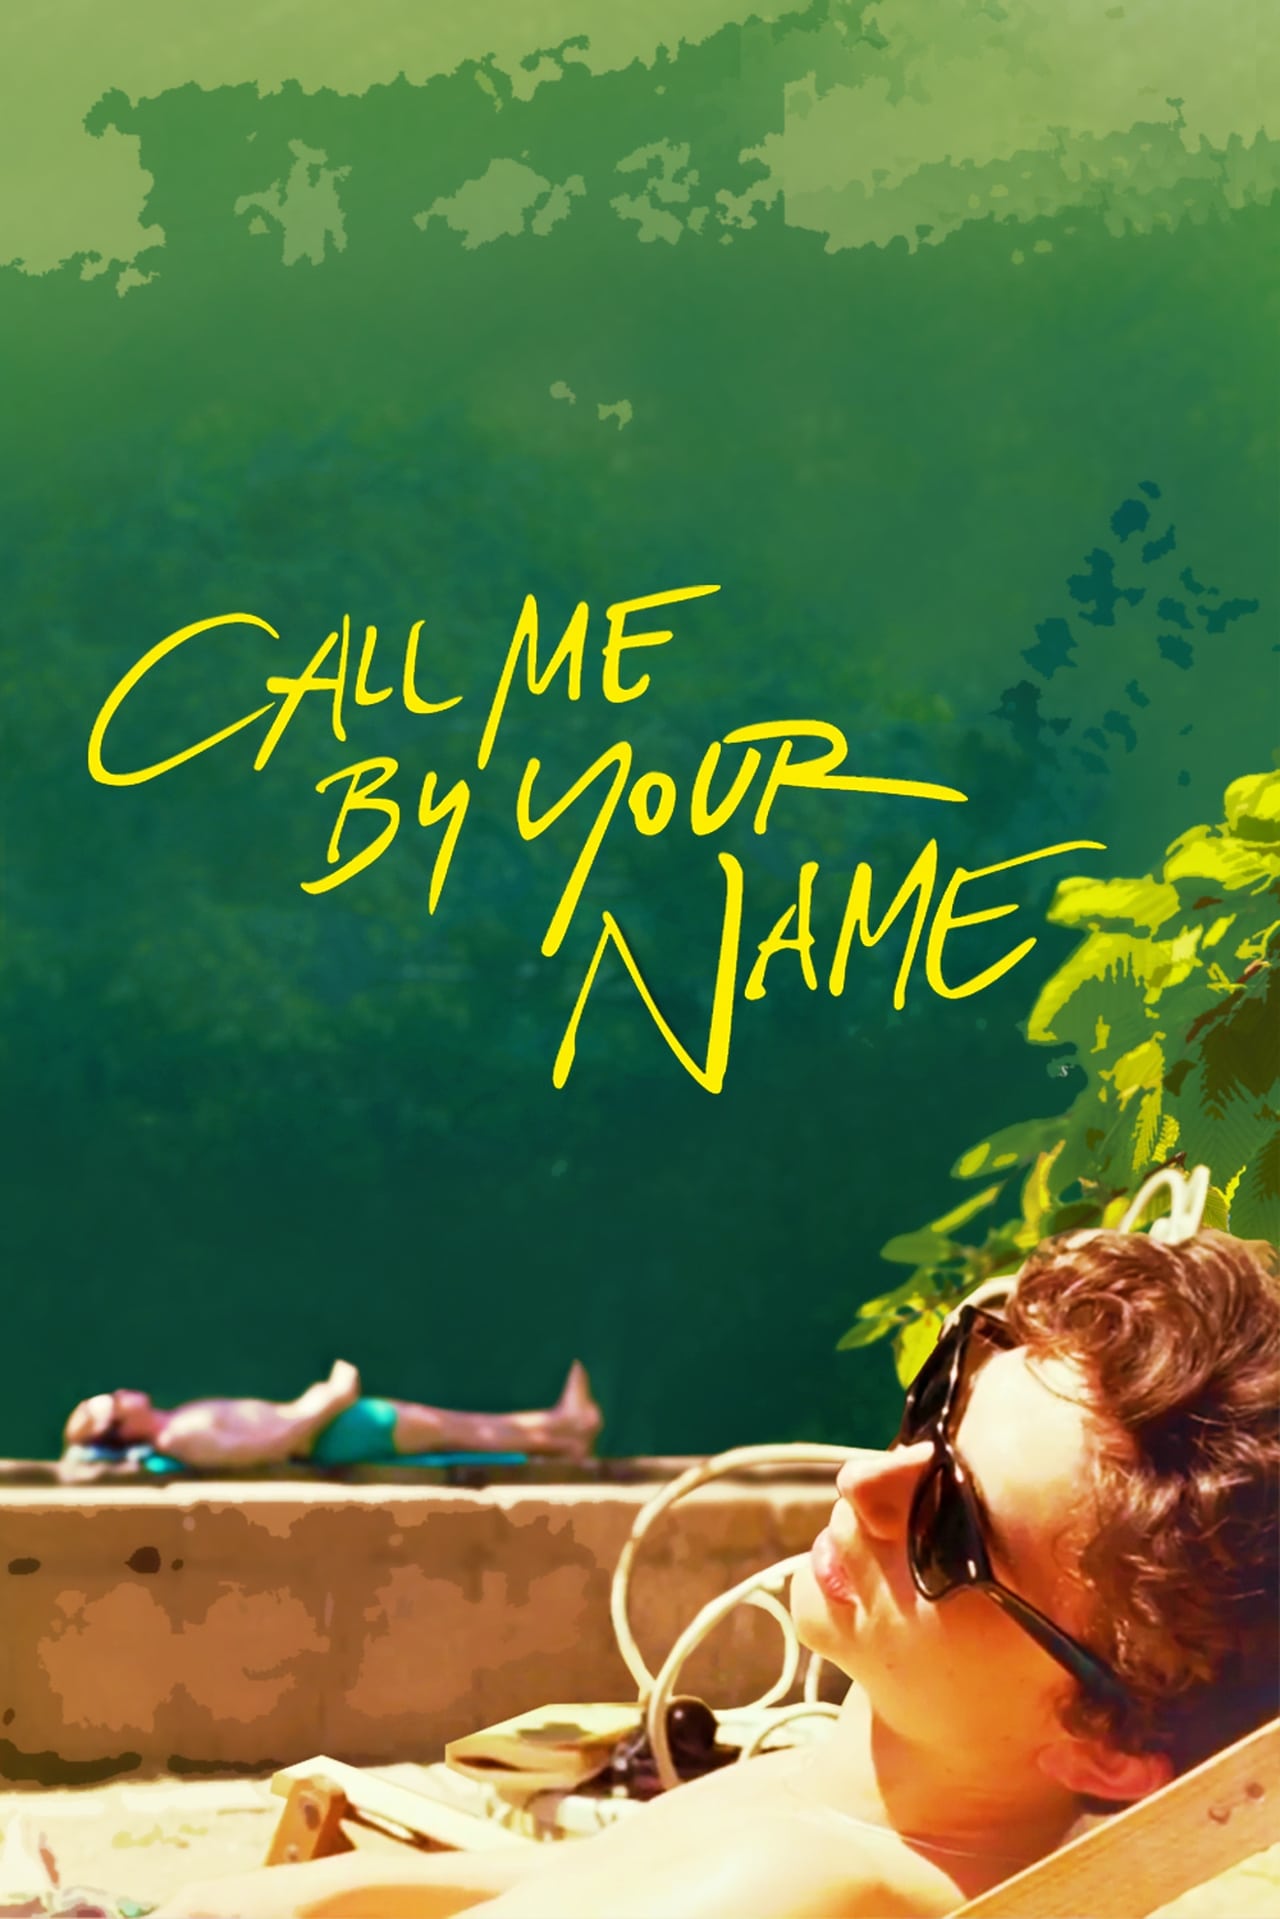 Free Watch Call Me by Your Name (2017) Online Movies at play